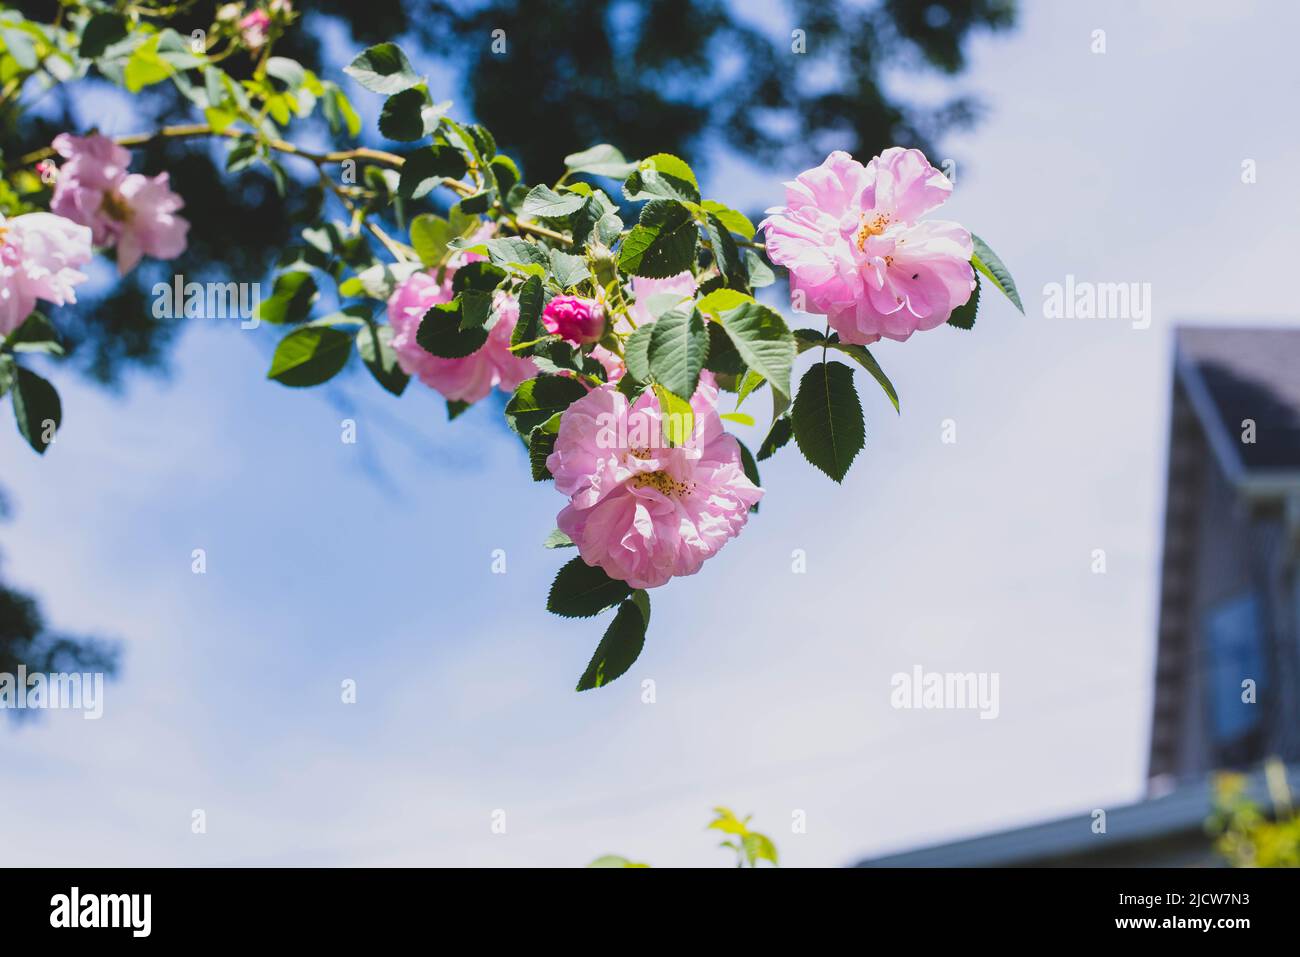 Wild roses hanging off a bush on a summer day. Stock Photo